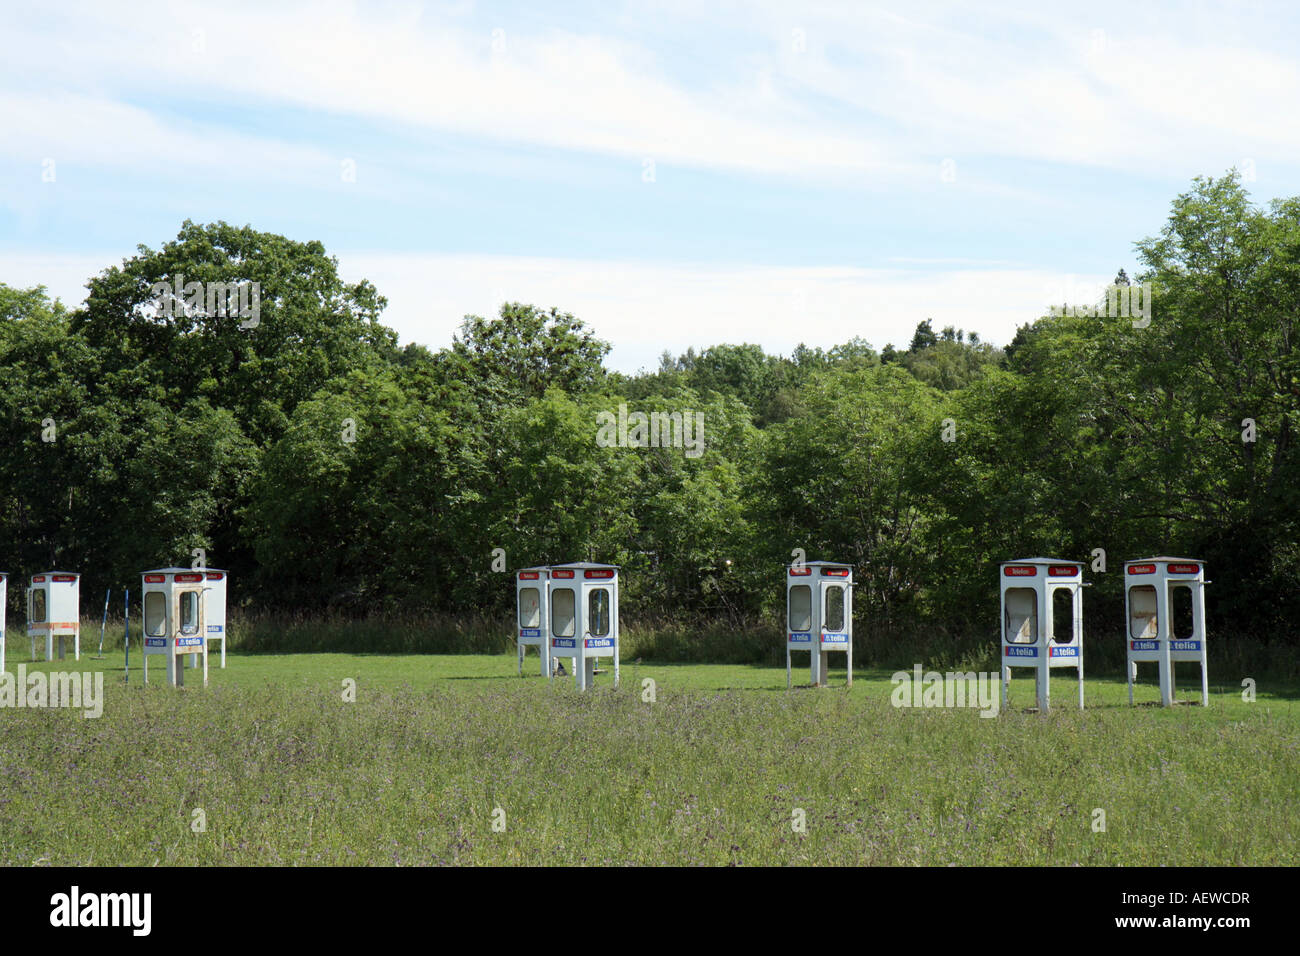 Field of scrapped phone booths as obstacles at the football golf course at Mix Ranch, Gotland, Sweden Stock Photo